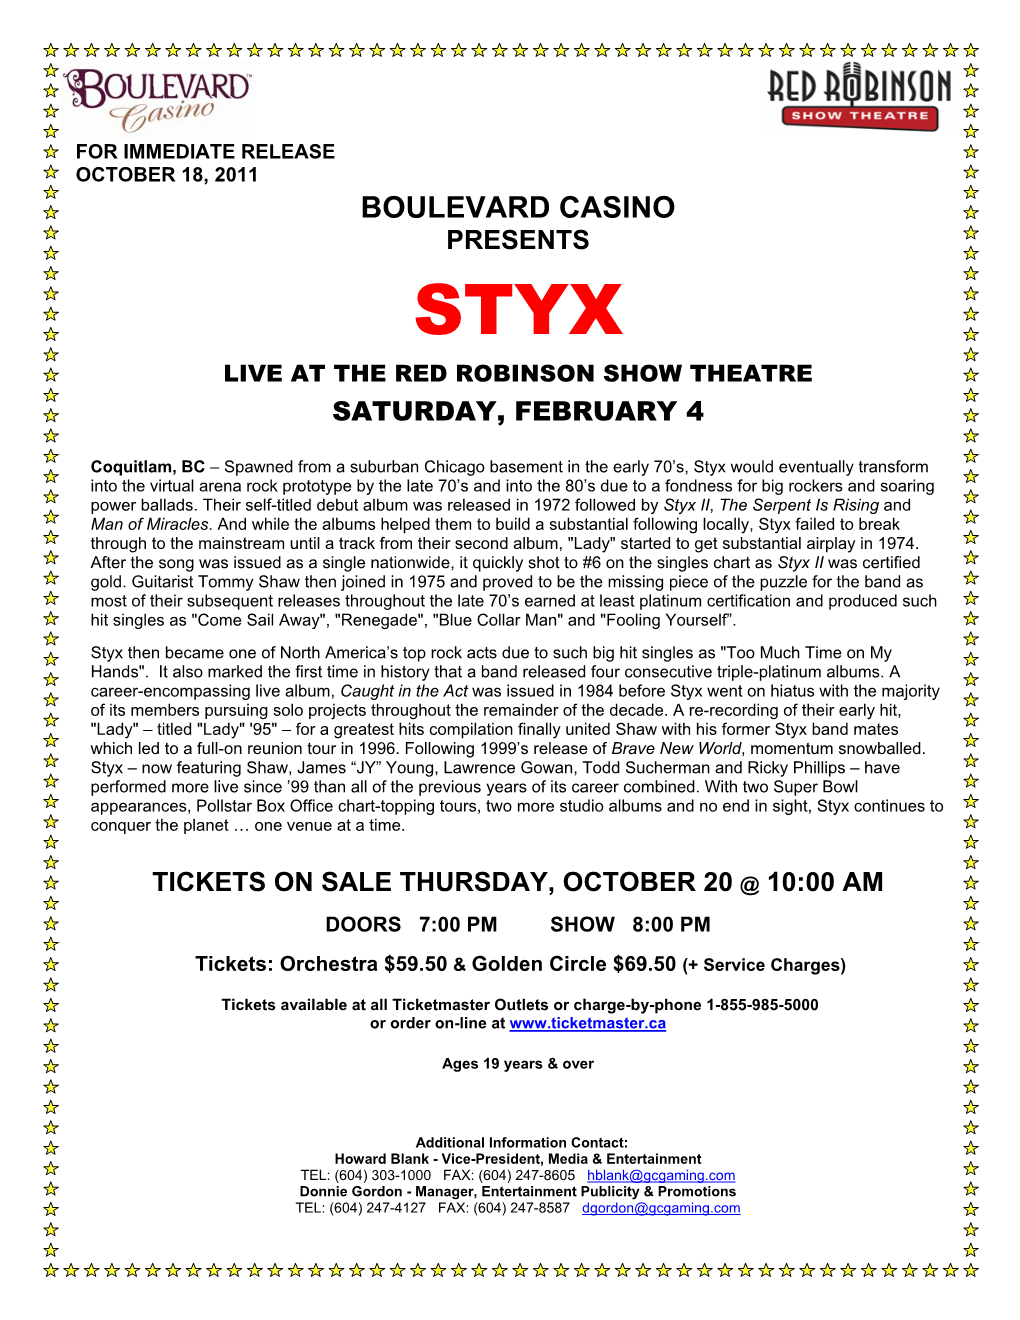 Styx Live at the Red Robinson Show Theatre